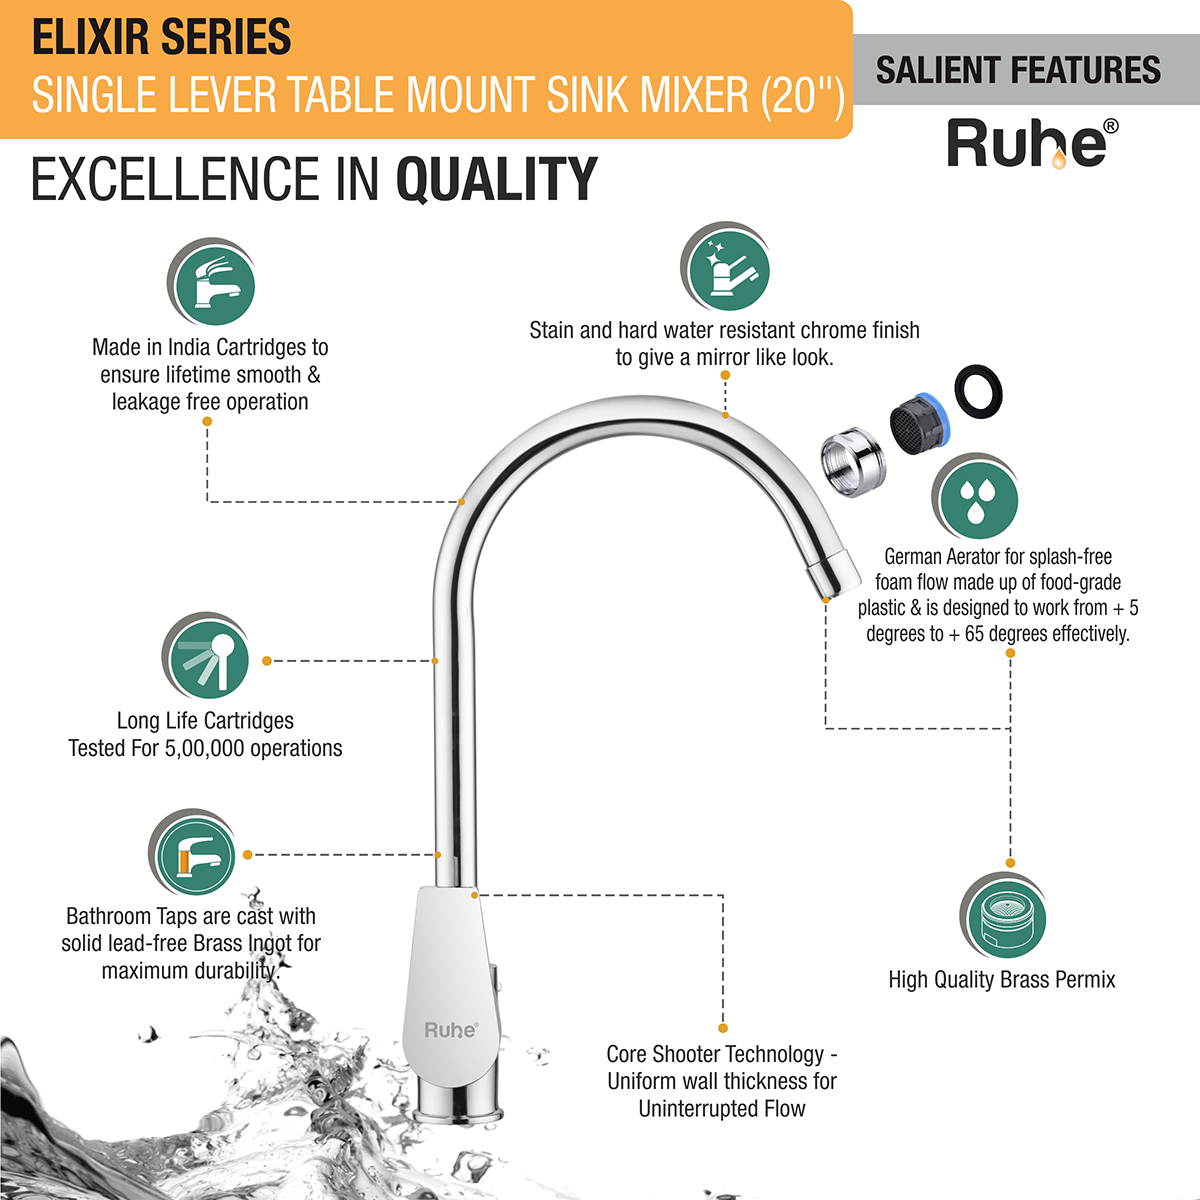 Elixir Single Lever Table Mount Sink Mixer Brass Faucet with Large (20 inches) Round Swivel Spout features and benefits